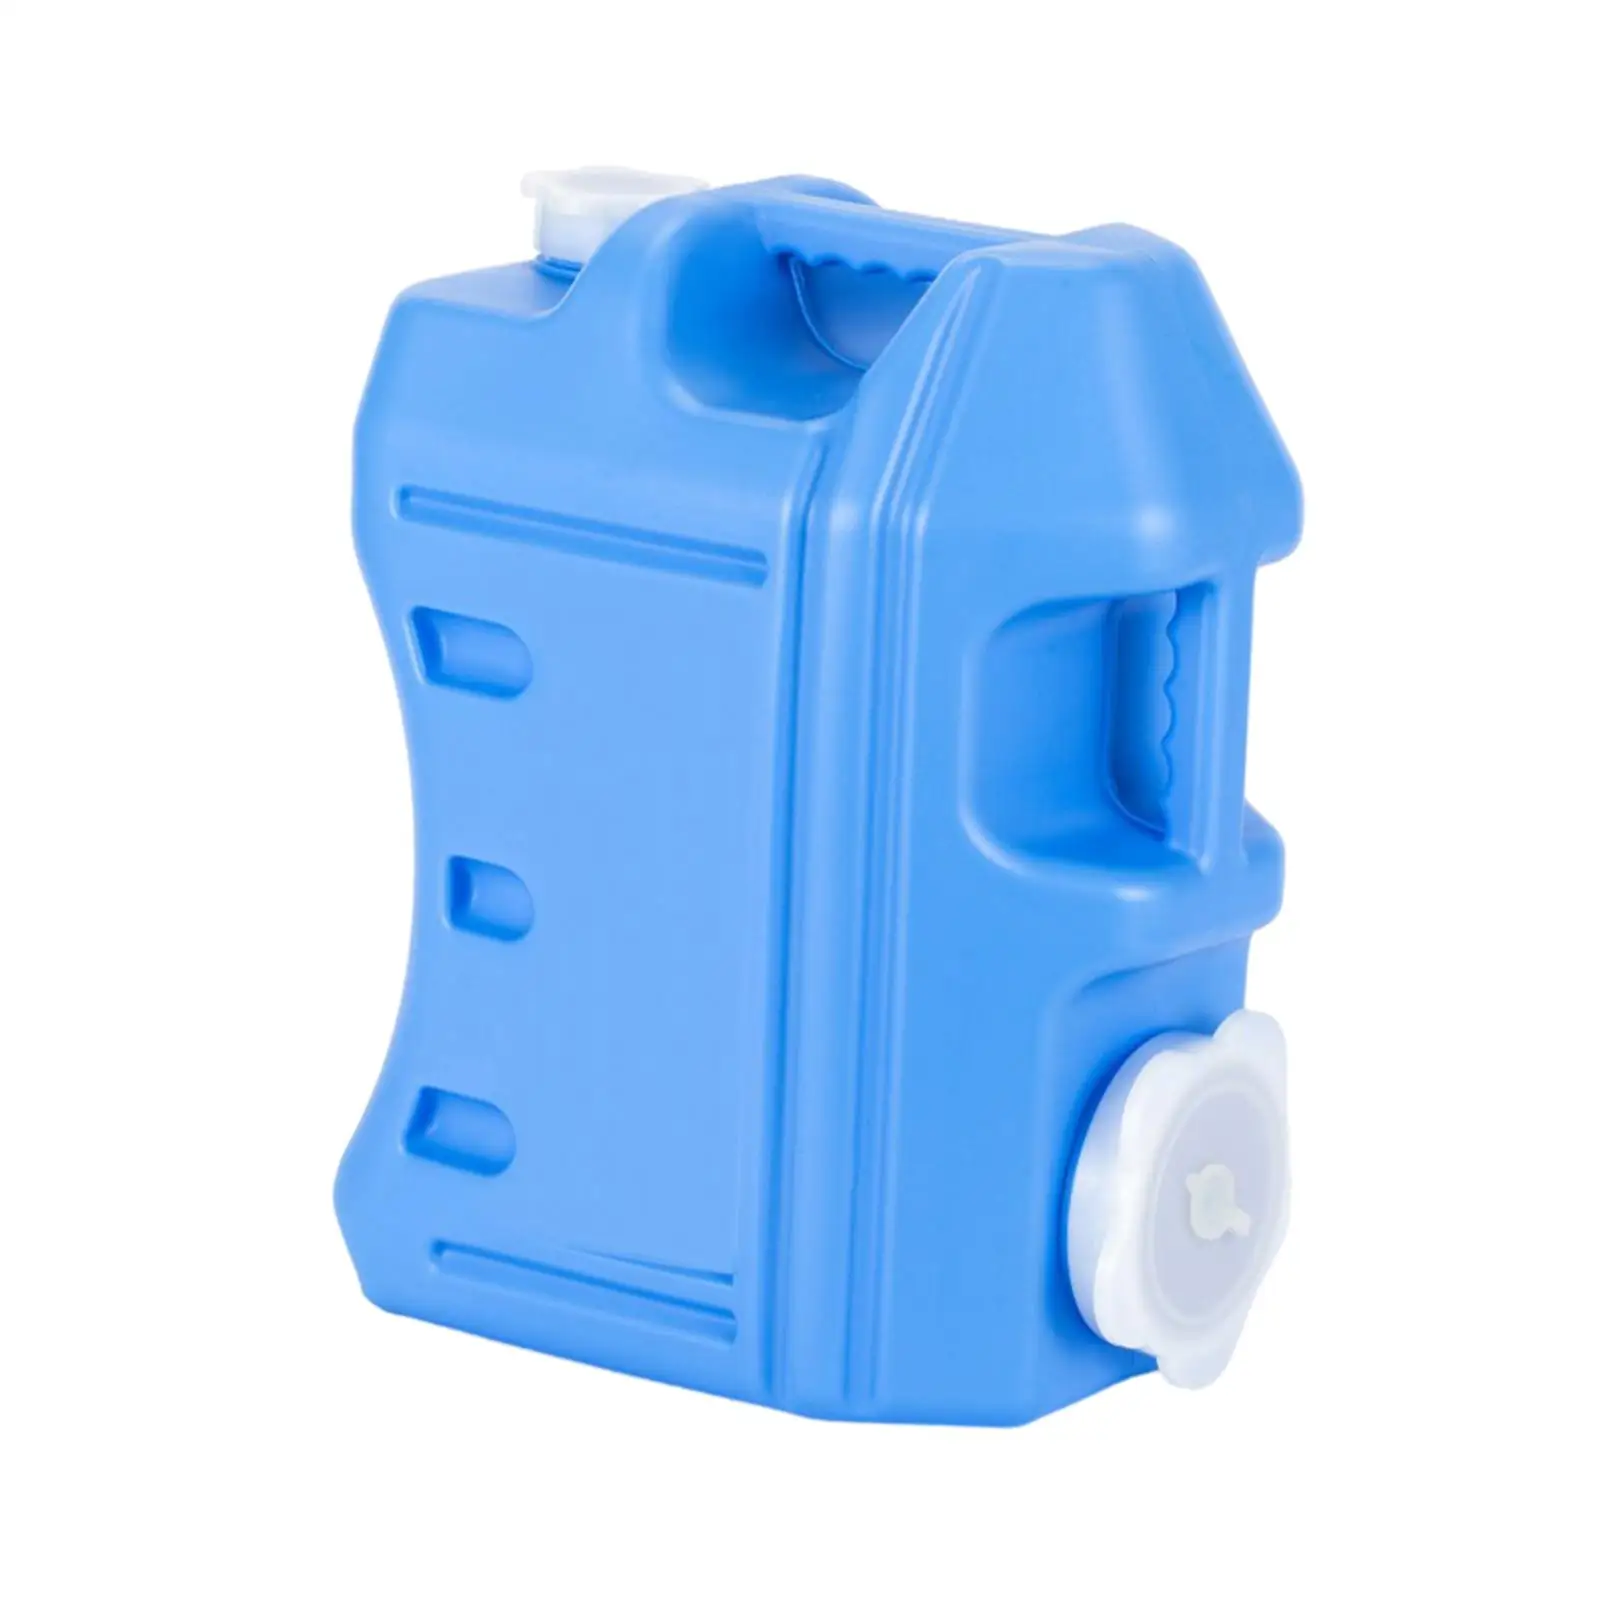 Portable Water Container 15L with Spigot Drinking Water Bottle Water Bucket Water Jug for Camping Hiking Bathing RV Picnic